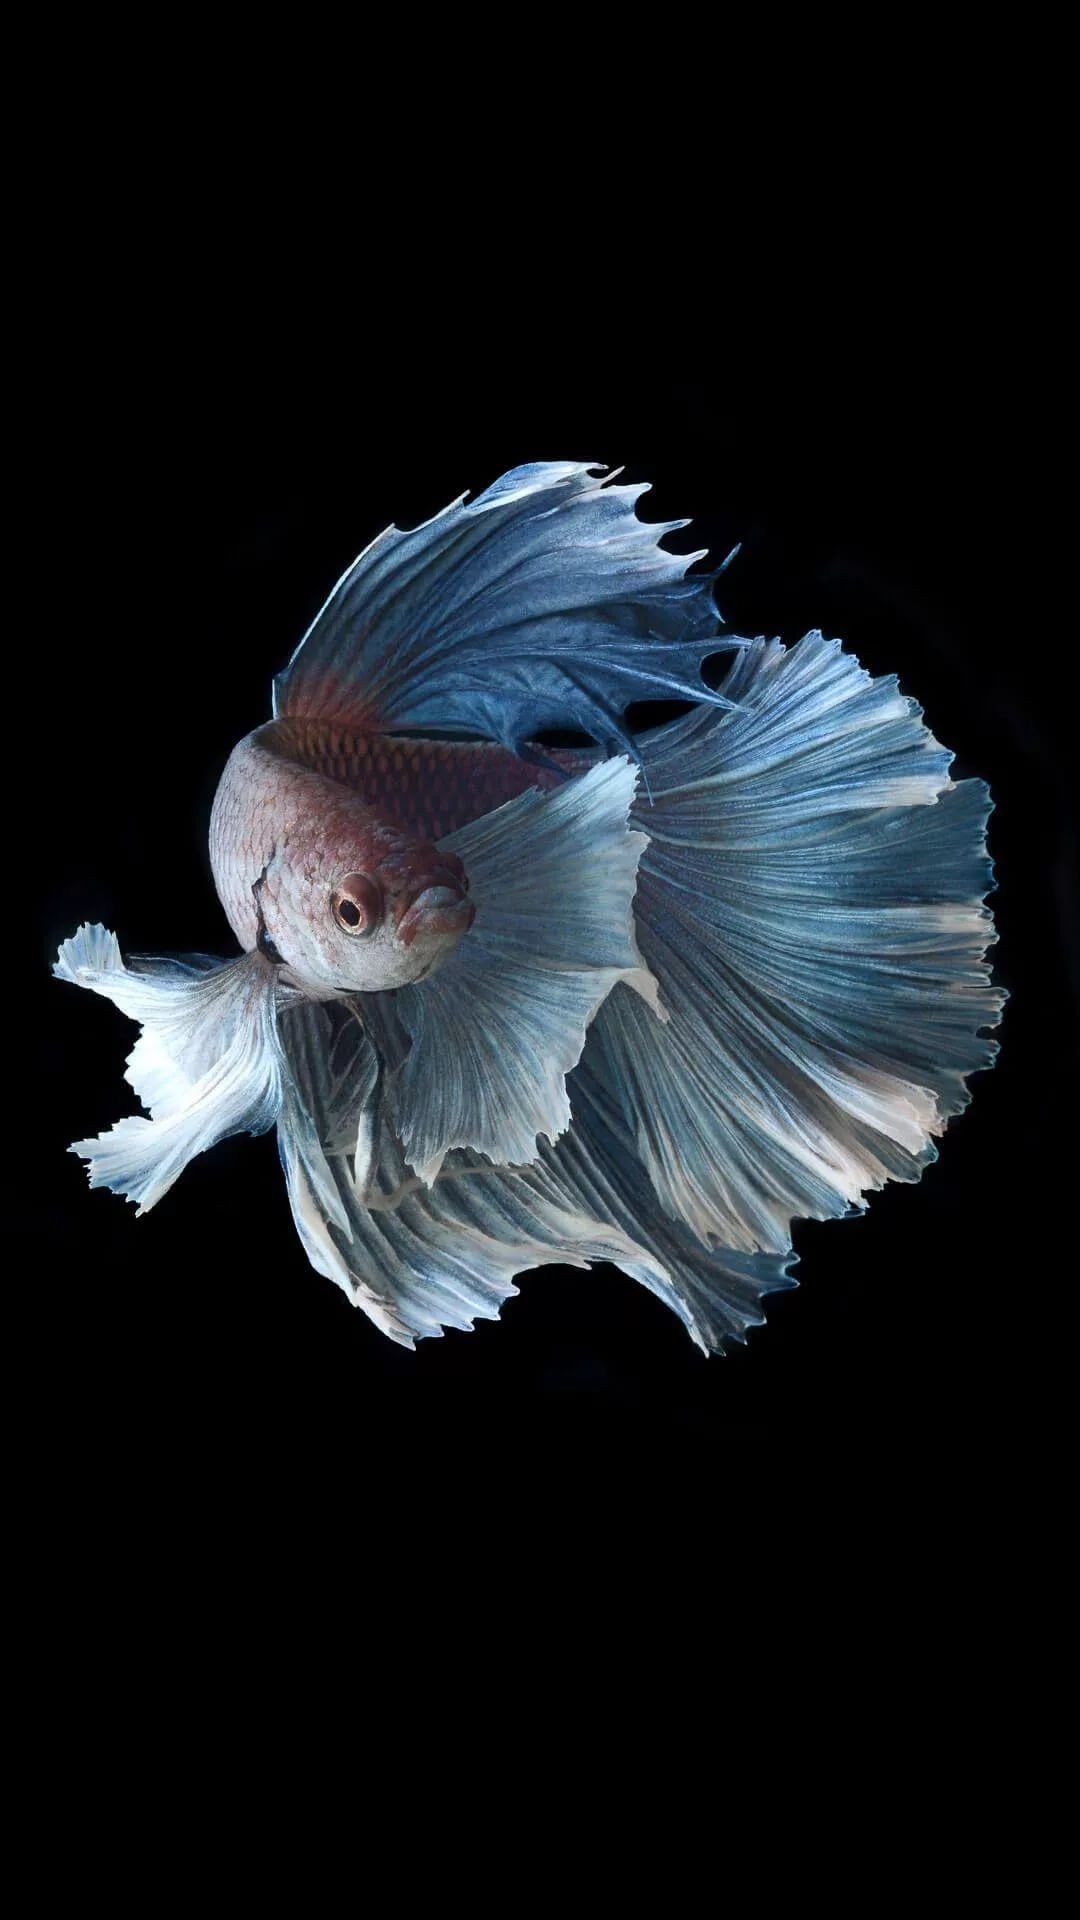 Betta Fish wallpaper for android